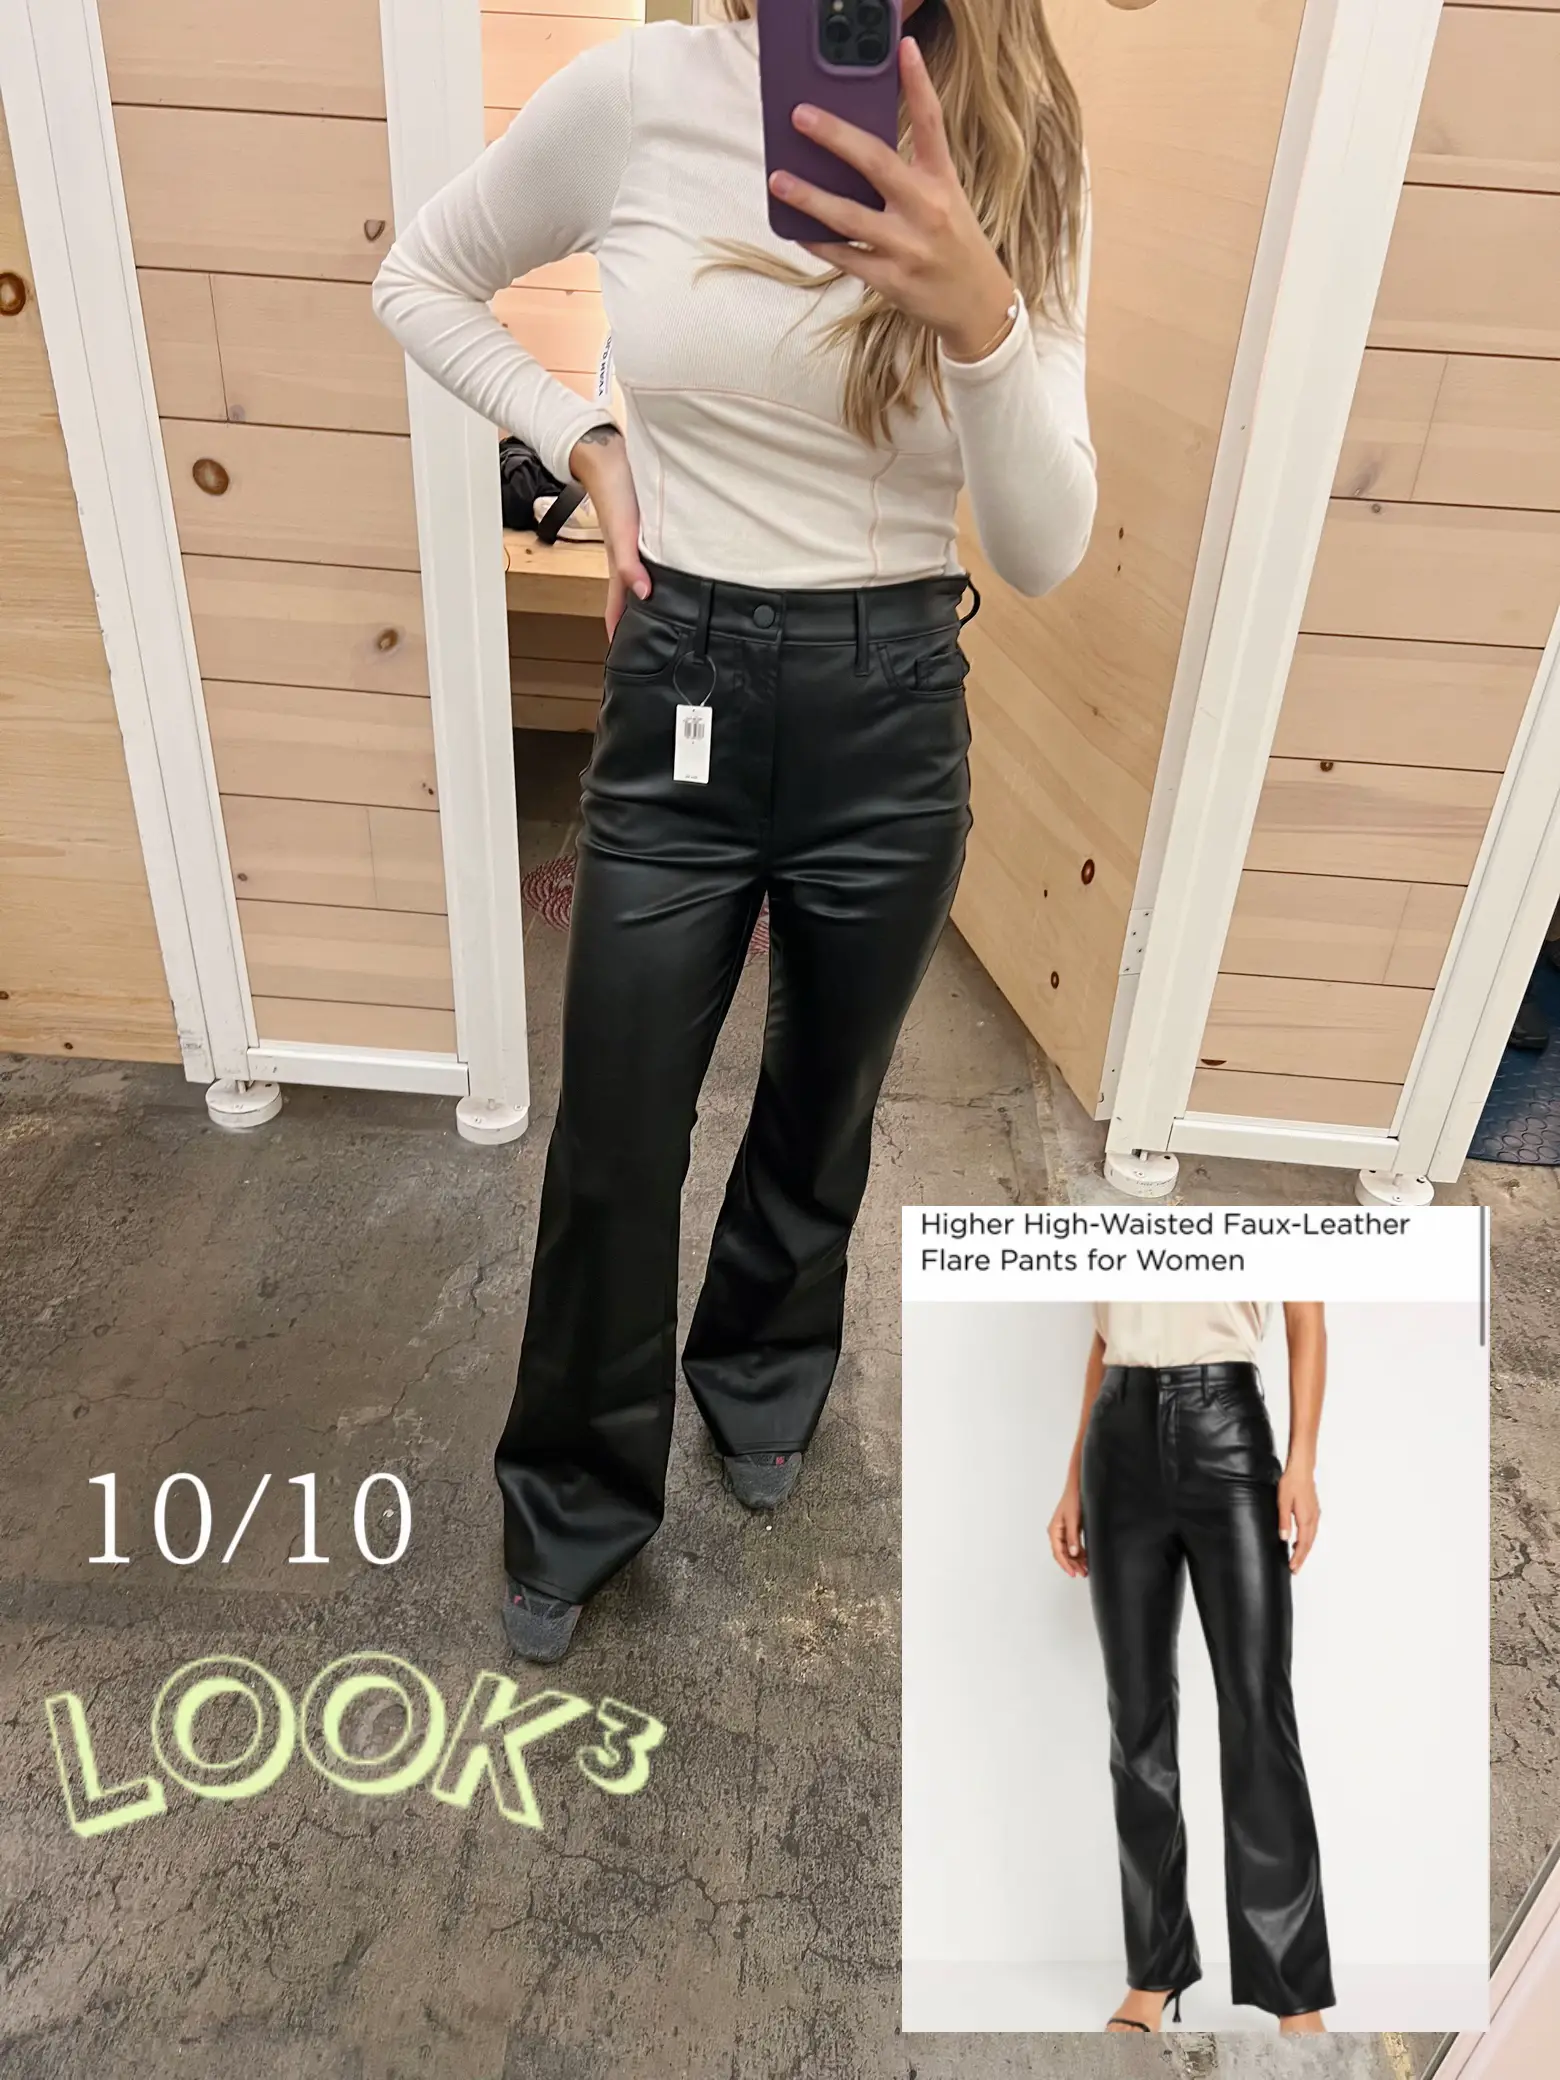 Higher High-Waisted Faux-Leather Flare Pants for Women